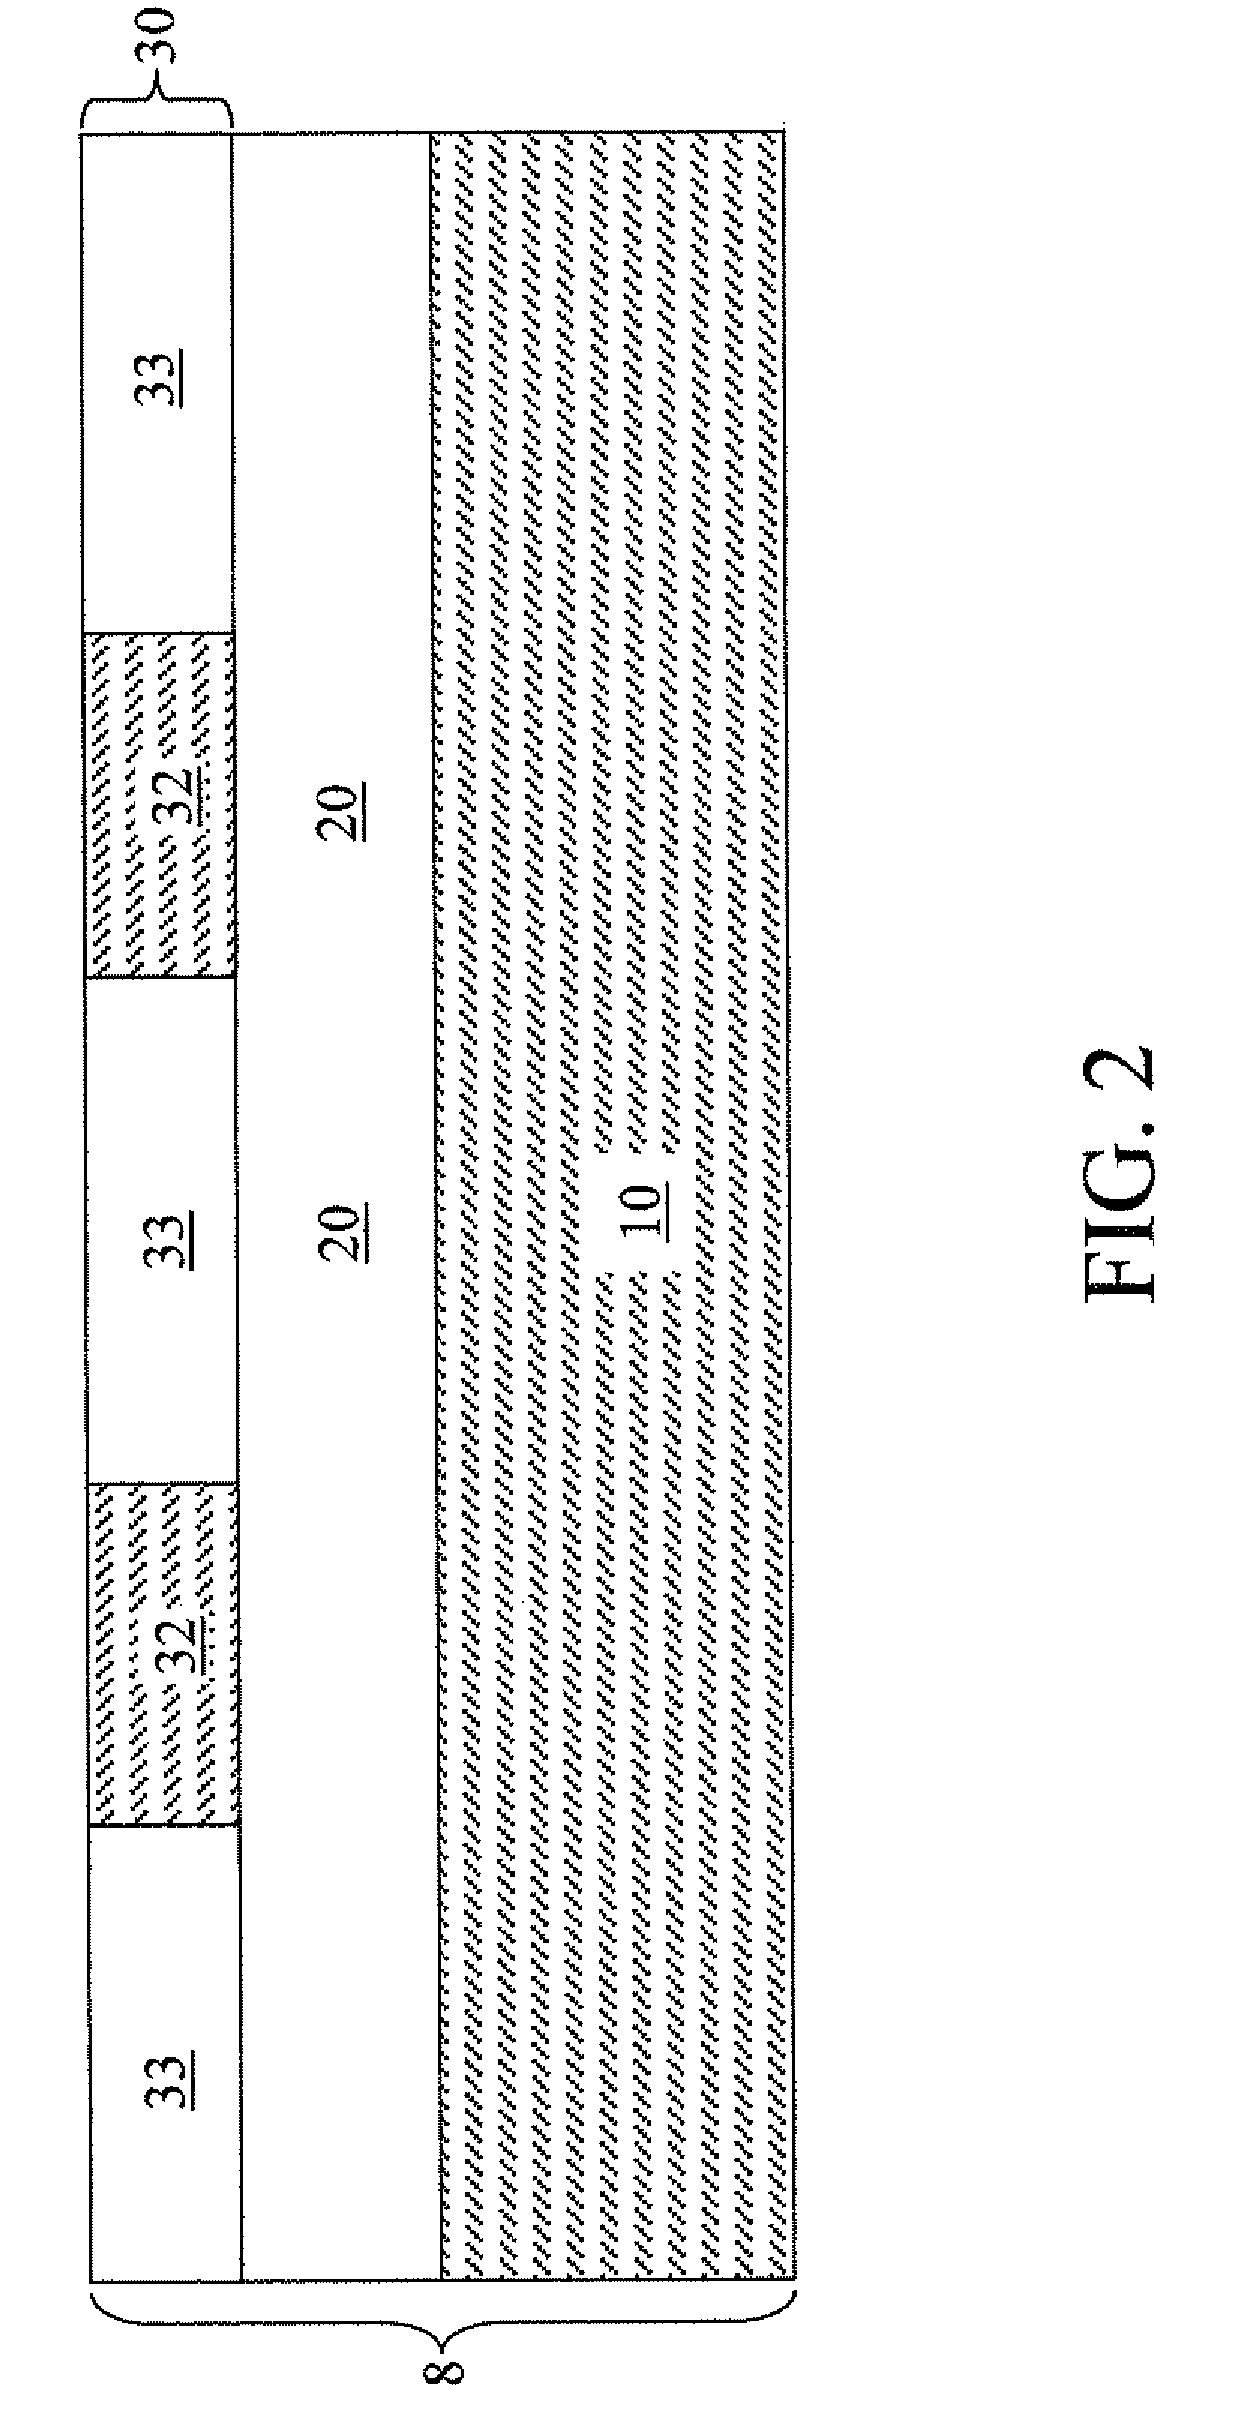 SOI radio frequency switch with enhanced signal fidelity and electrical isolation